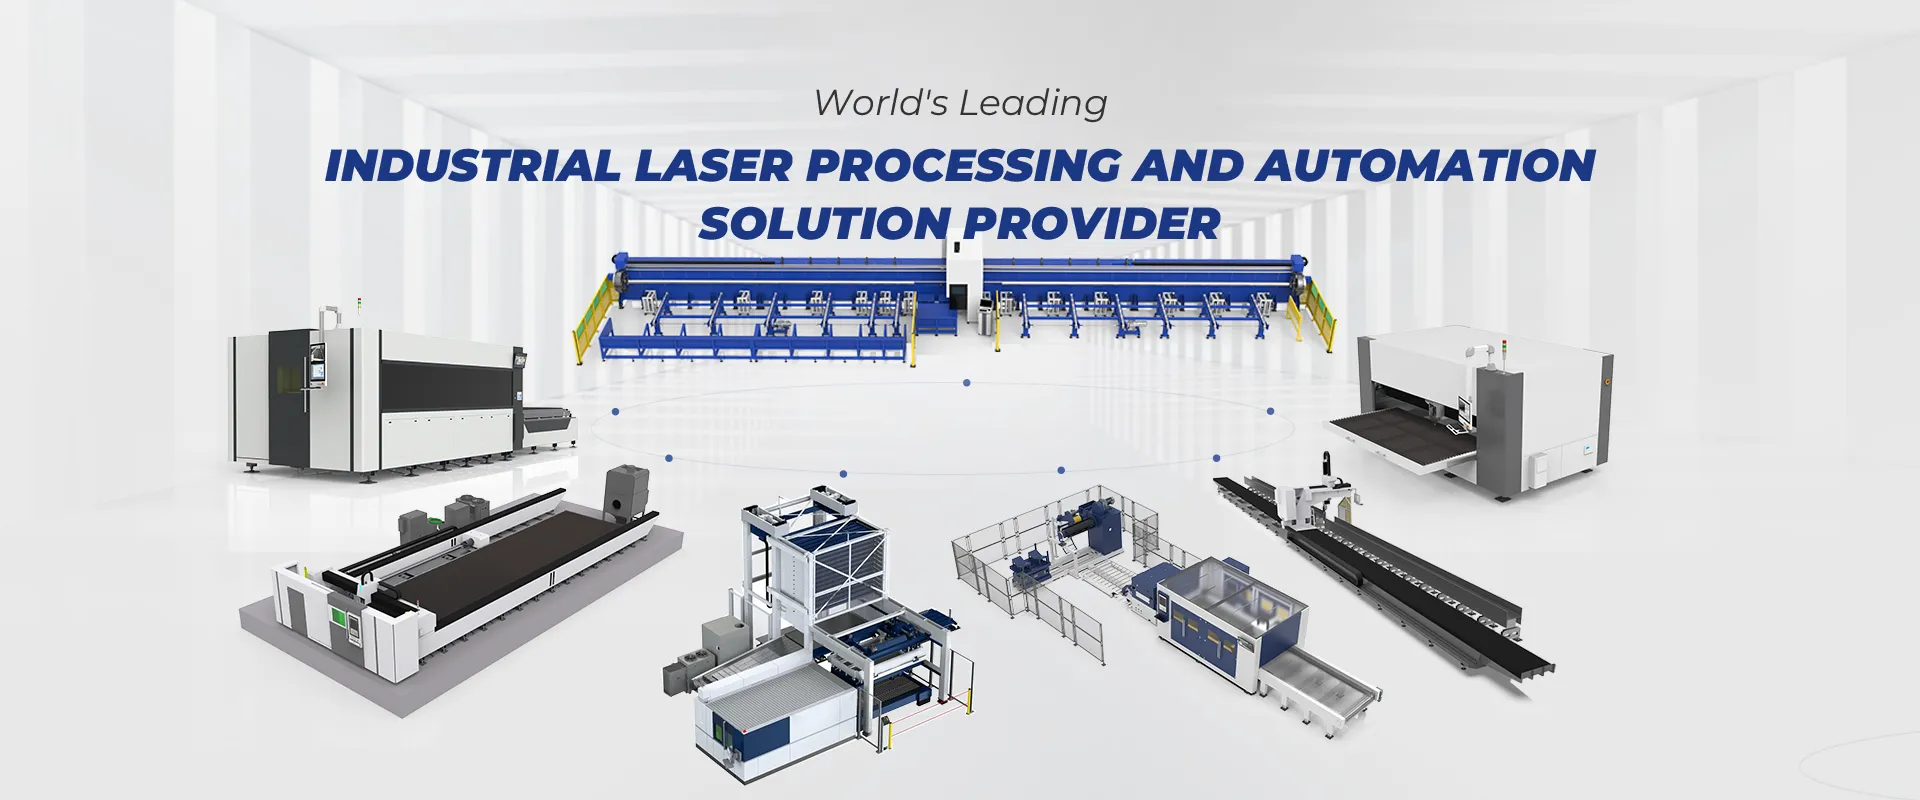 World's Leading Industrial Laser Processing and Automation Solution Provider